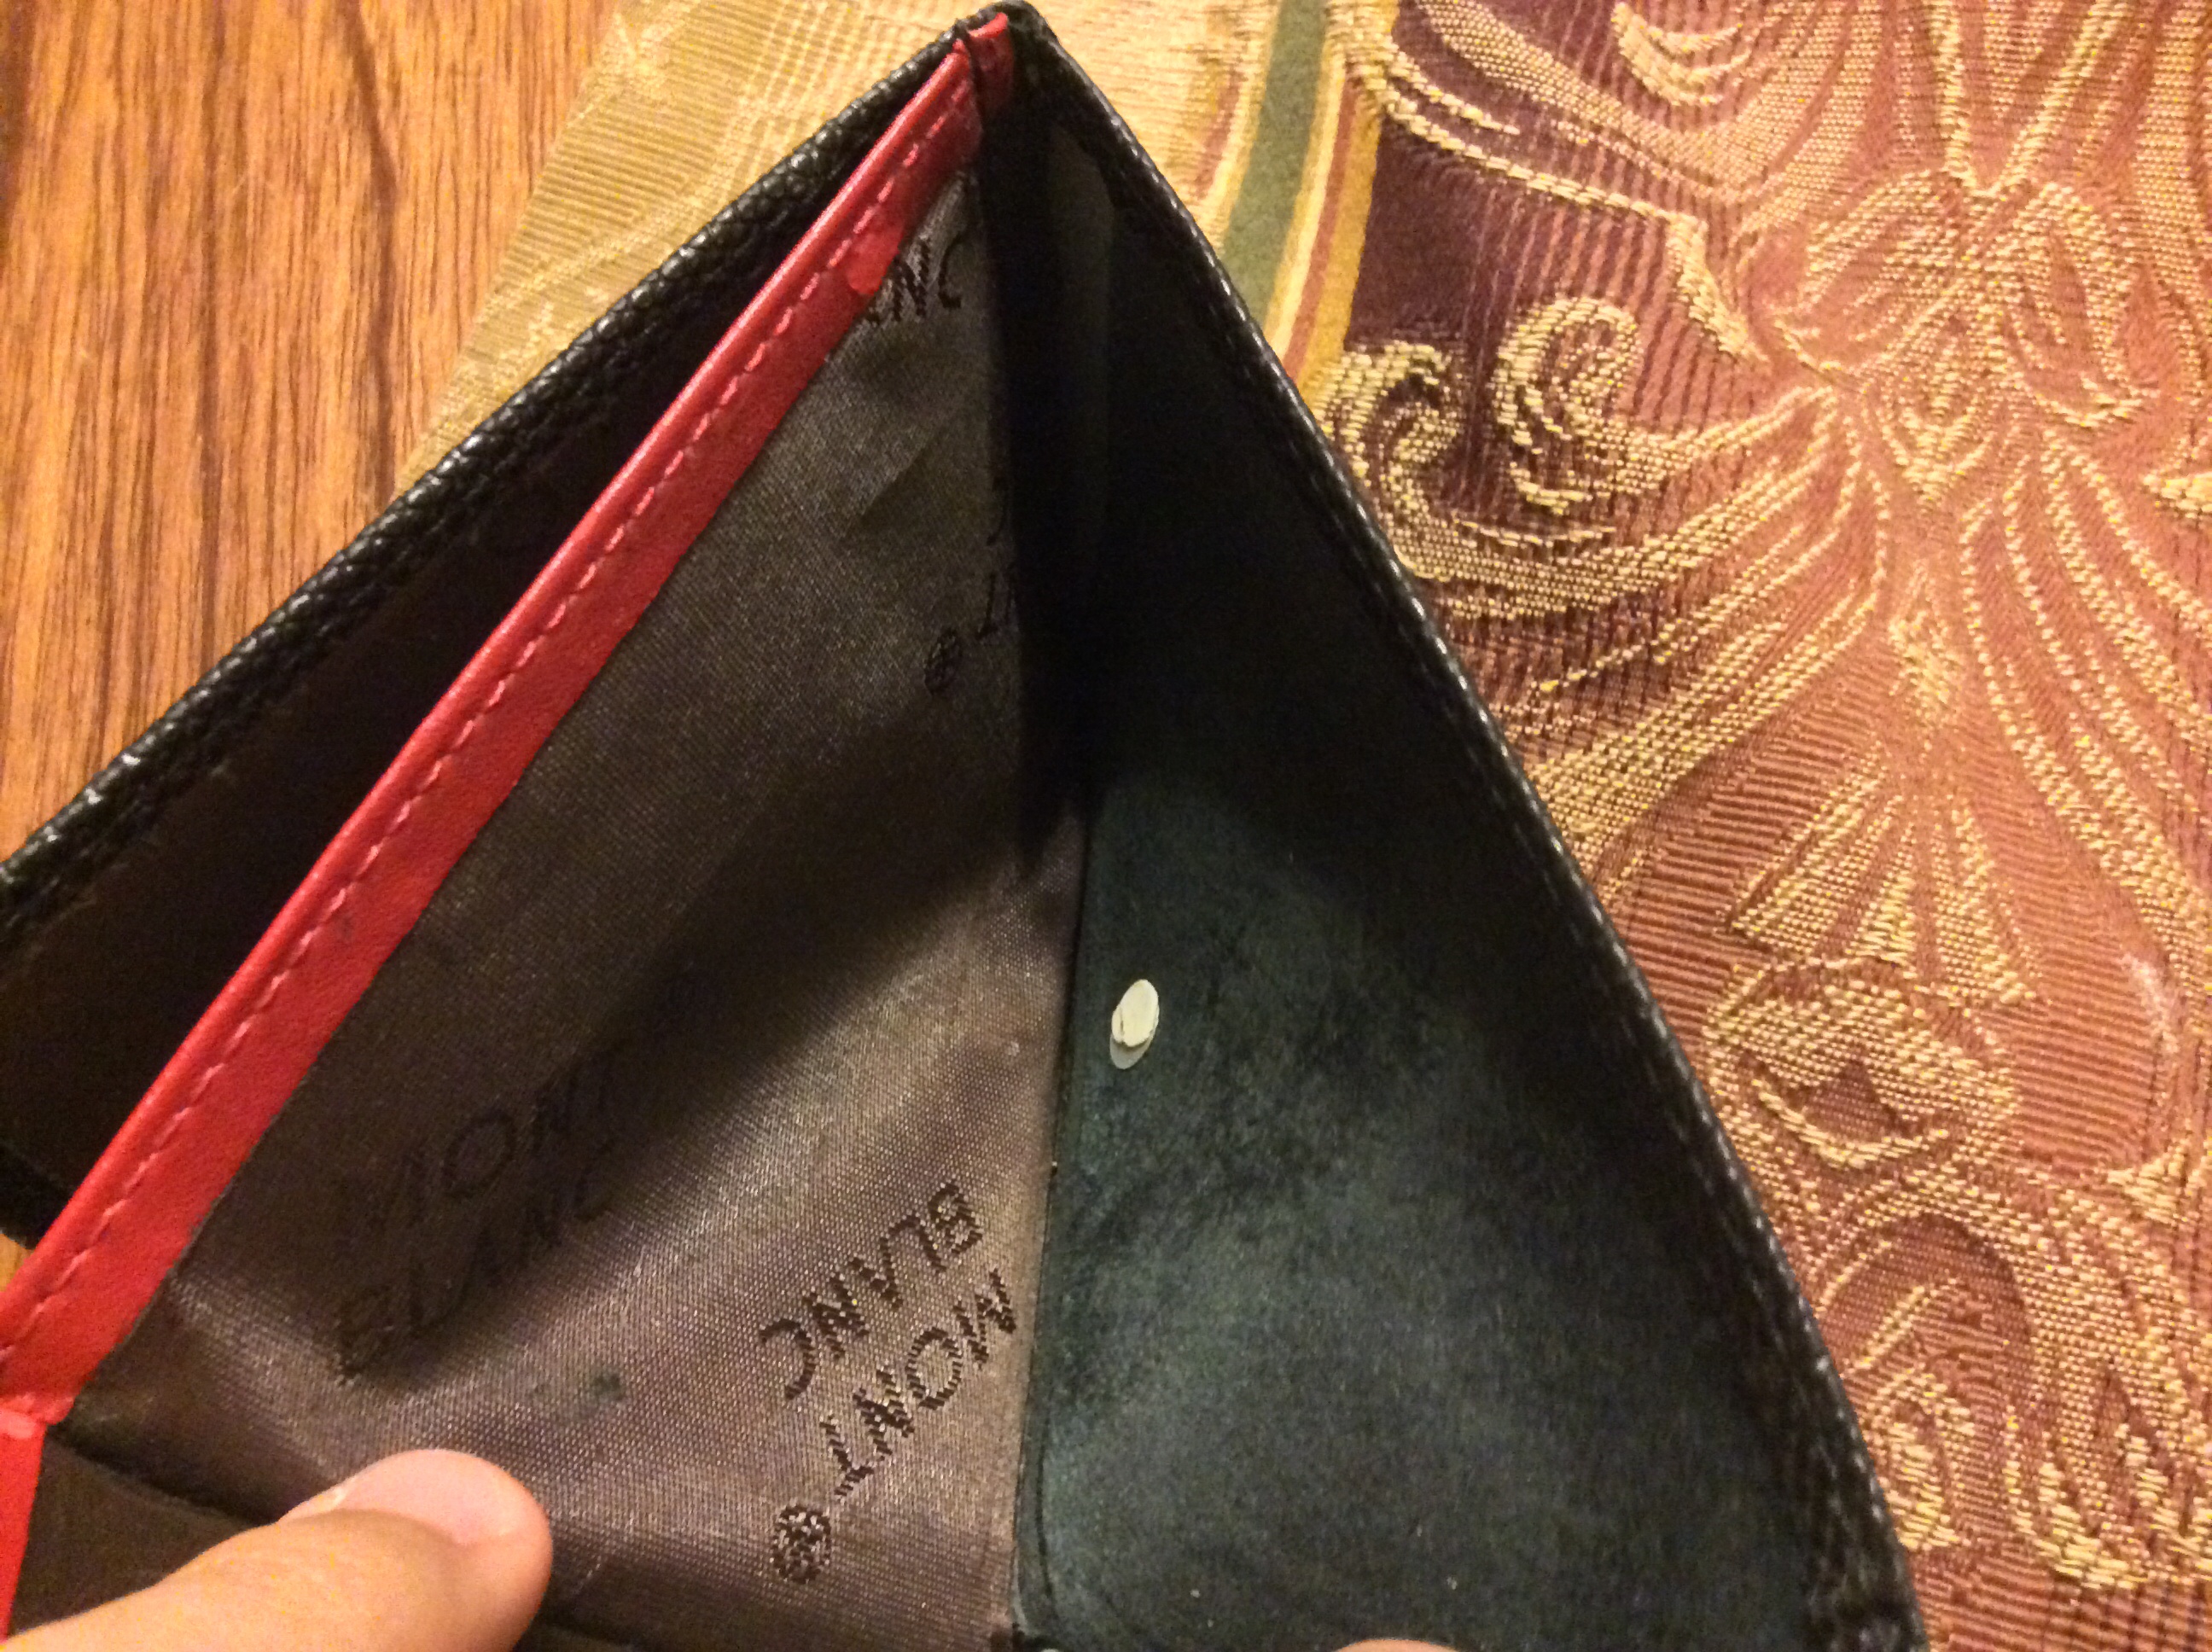 How to tell if I got an Authentic Mont Blanc wallet? | Styleforum